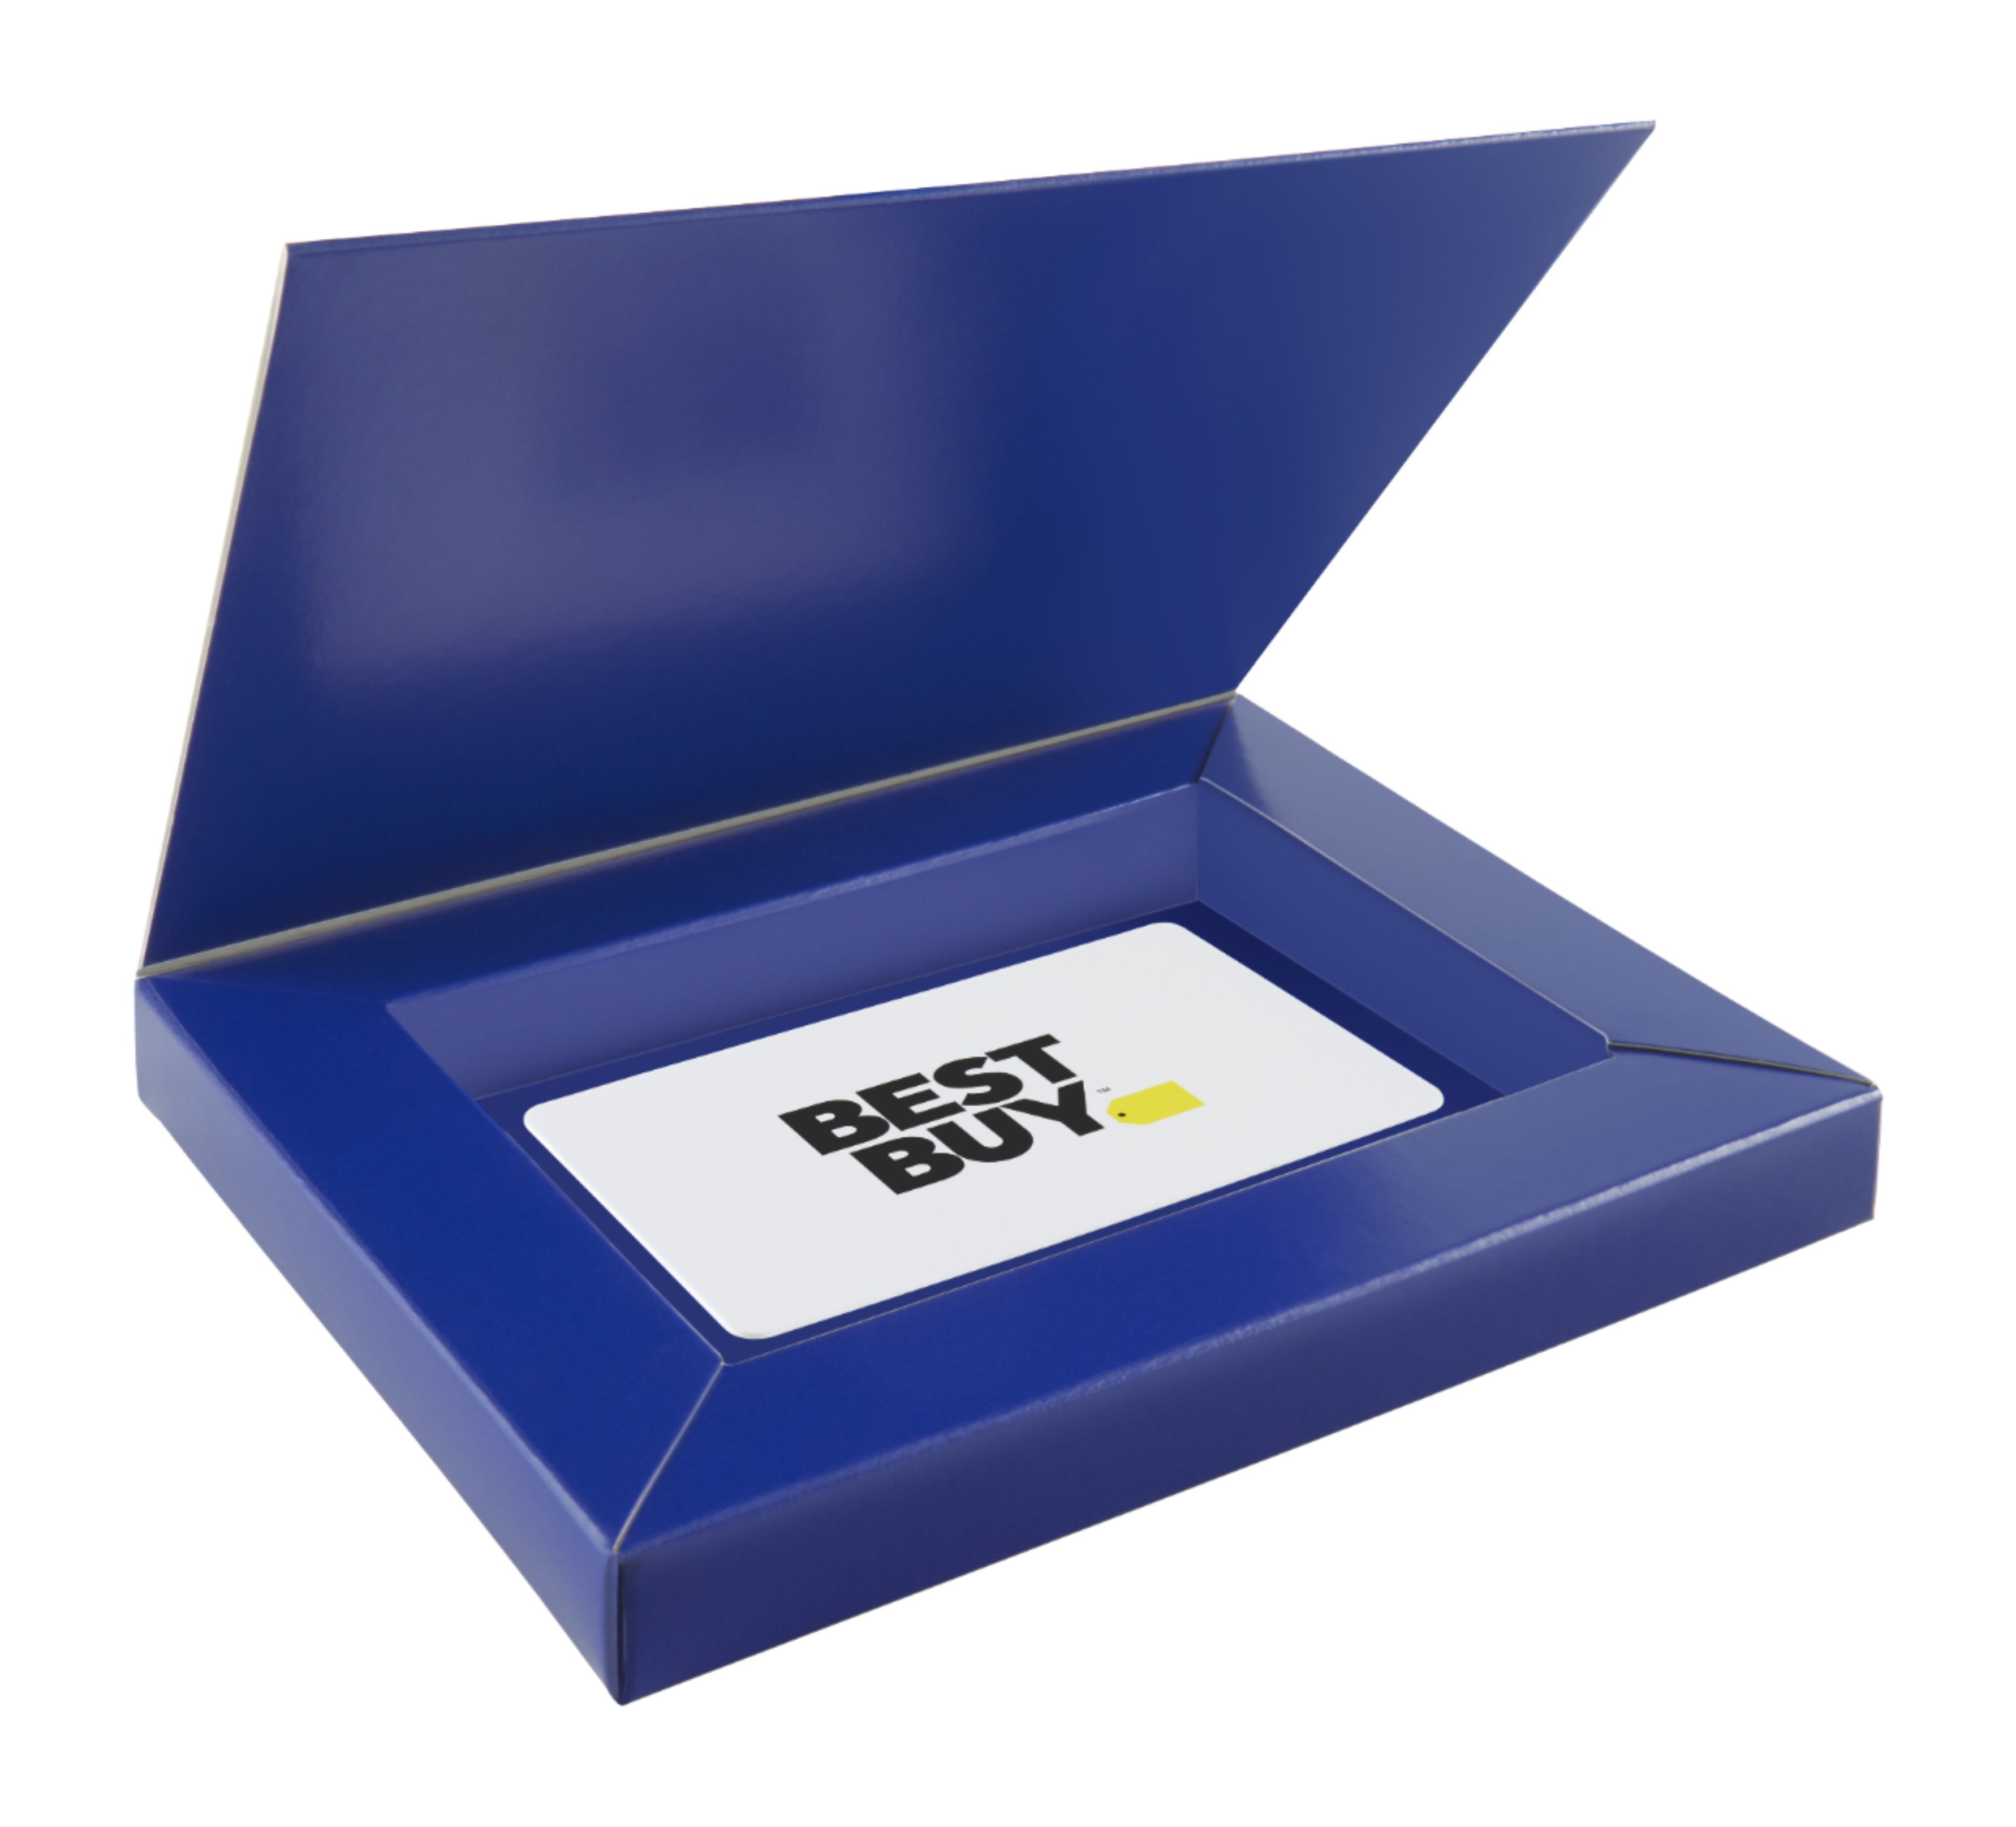 Best Buy Virtual Gift Card - 5 to 10 years